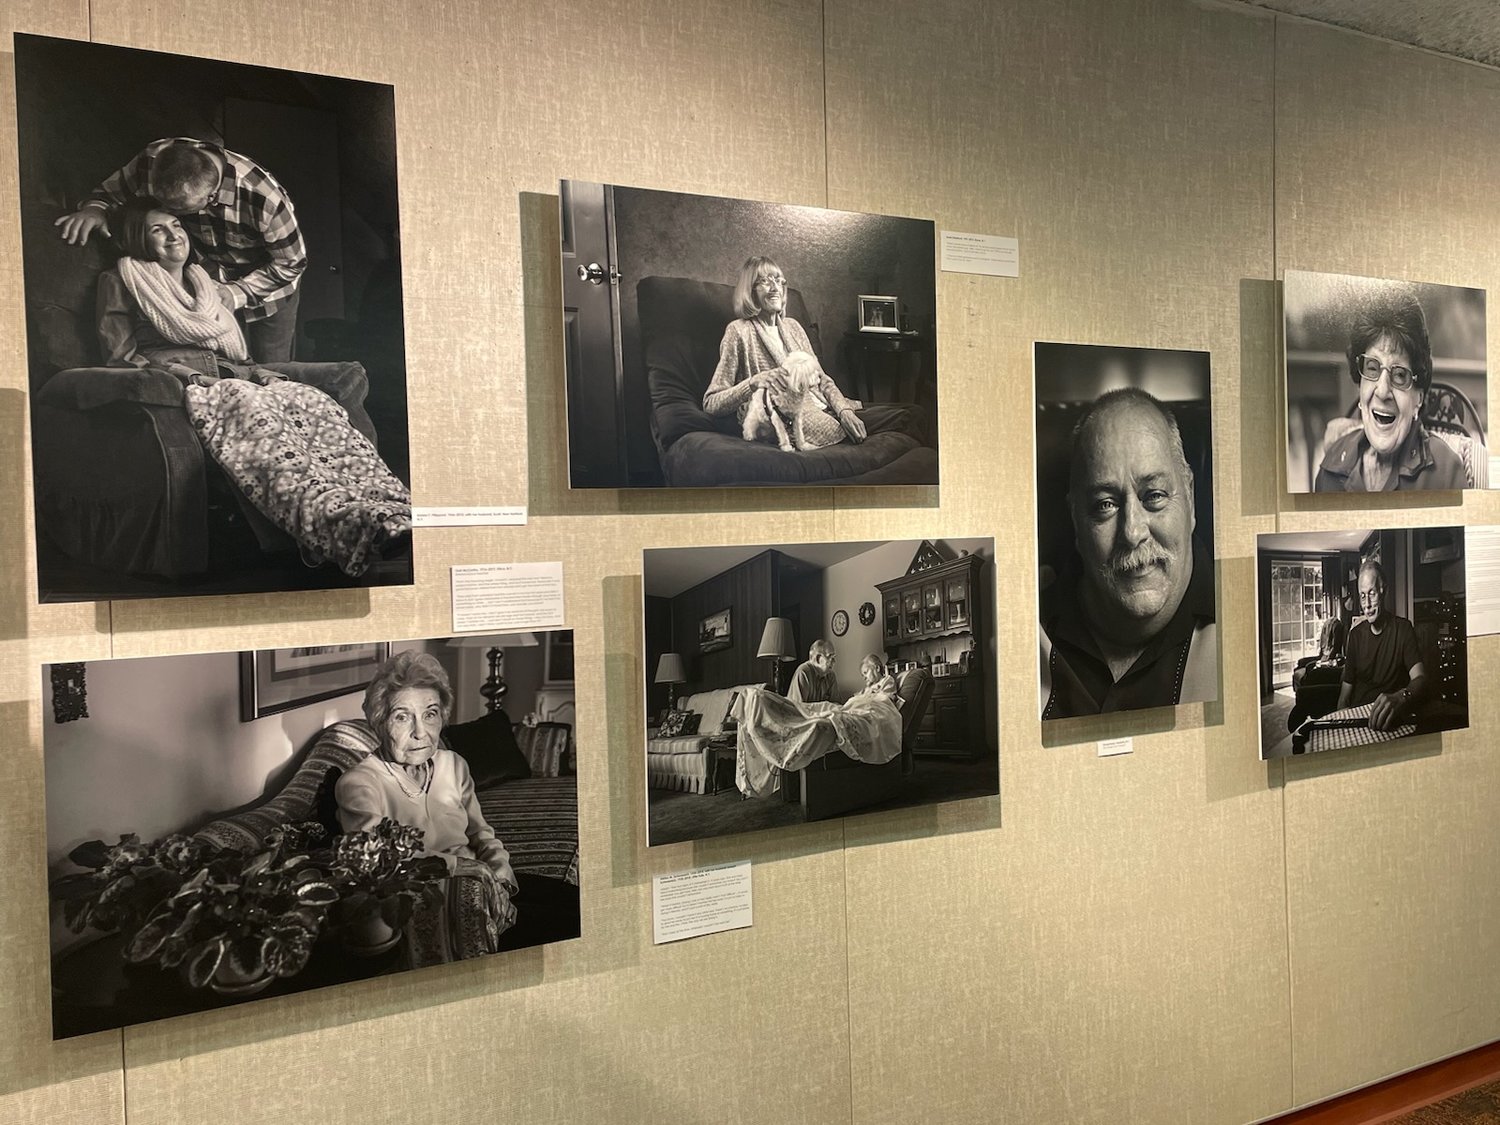 Portraits included in "The Last Portrait: Reflections at the End of Life" exhibit at SUNY Morrisville show the "living" during some of the last moments of life. Former patients were all residents of Oneida, Herkimer or Madison counties.